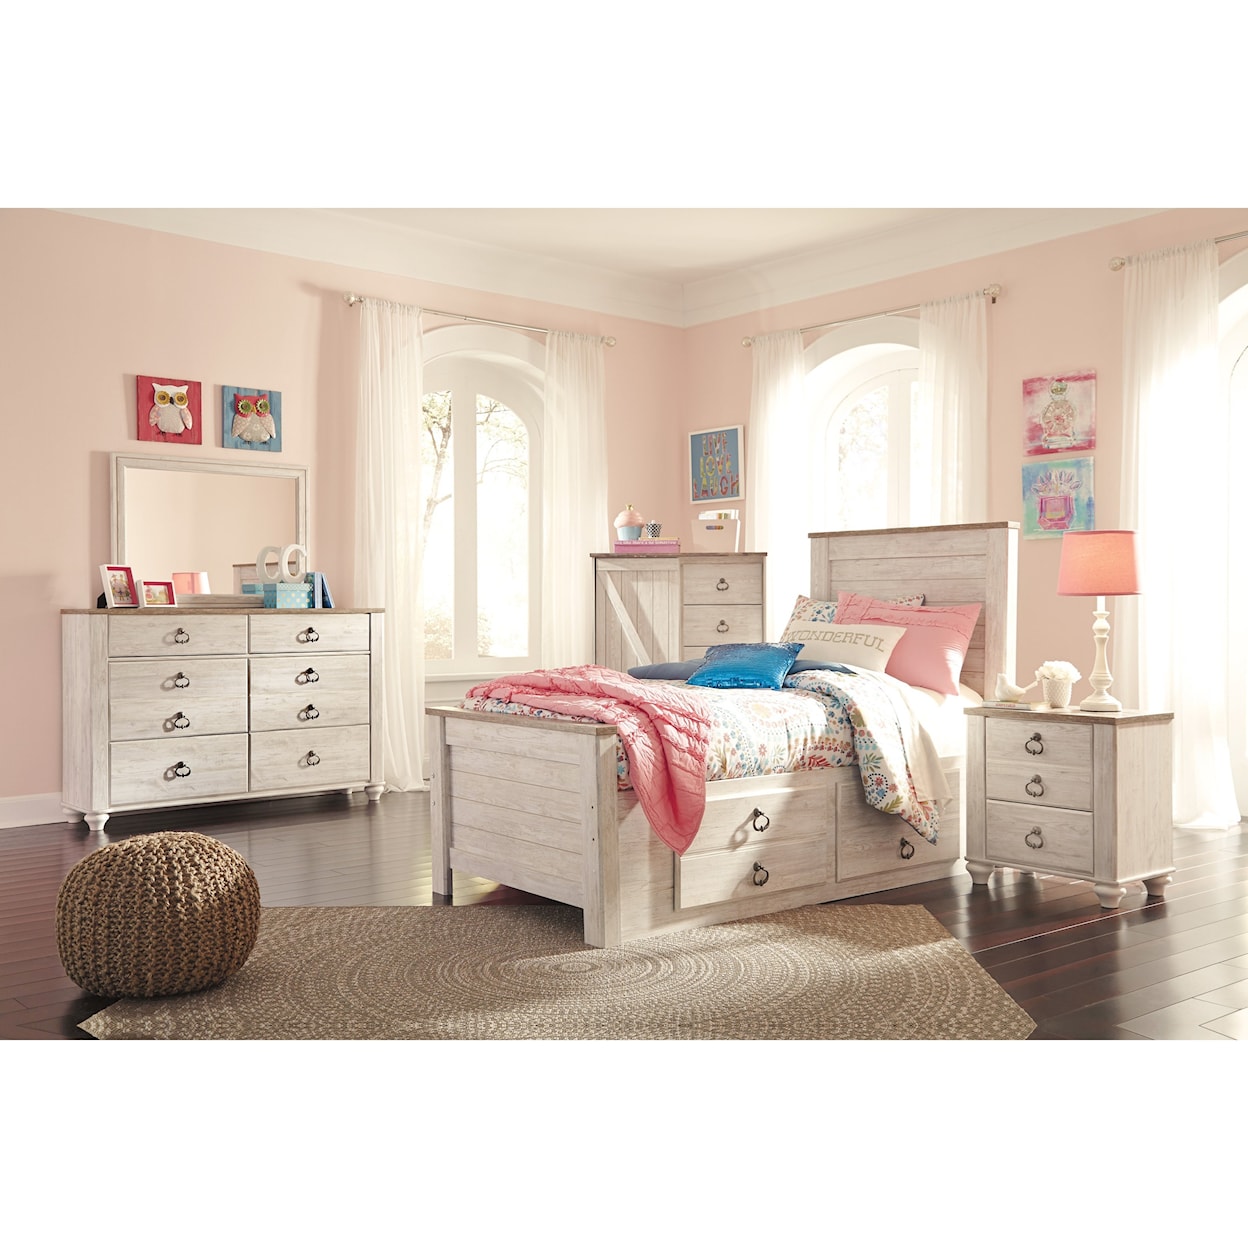 Benchcraft Willowton Twin Bed with Underbed Storage Drawers